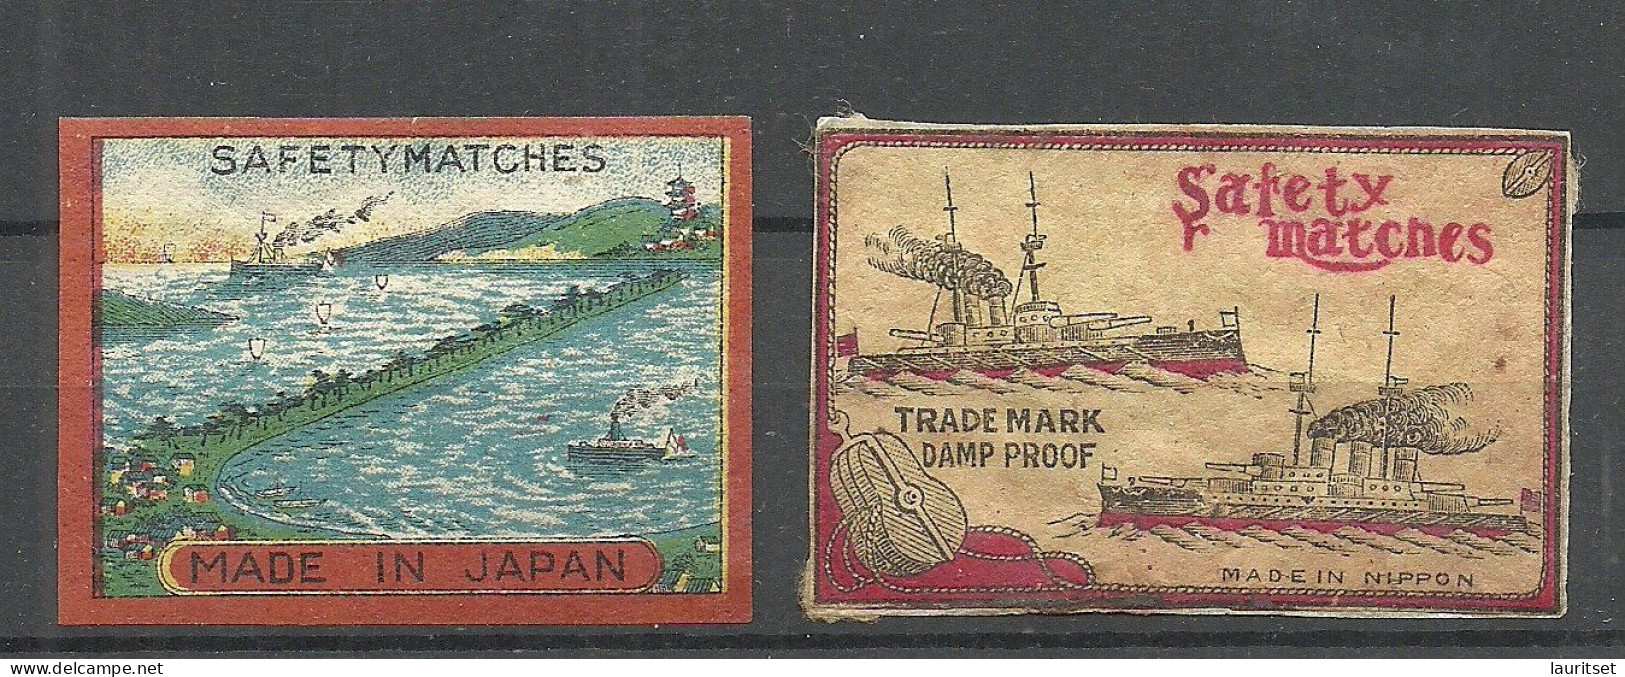 Made In JAPAN NIPPON - 2 Old Match Box Labels Zündholzschachteletiketten Ships Schiffe Safety Matches - Boites D'allumettes - Etiquettes